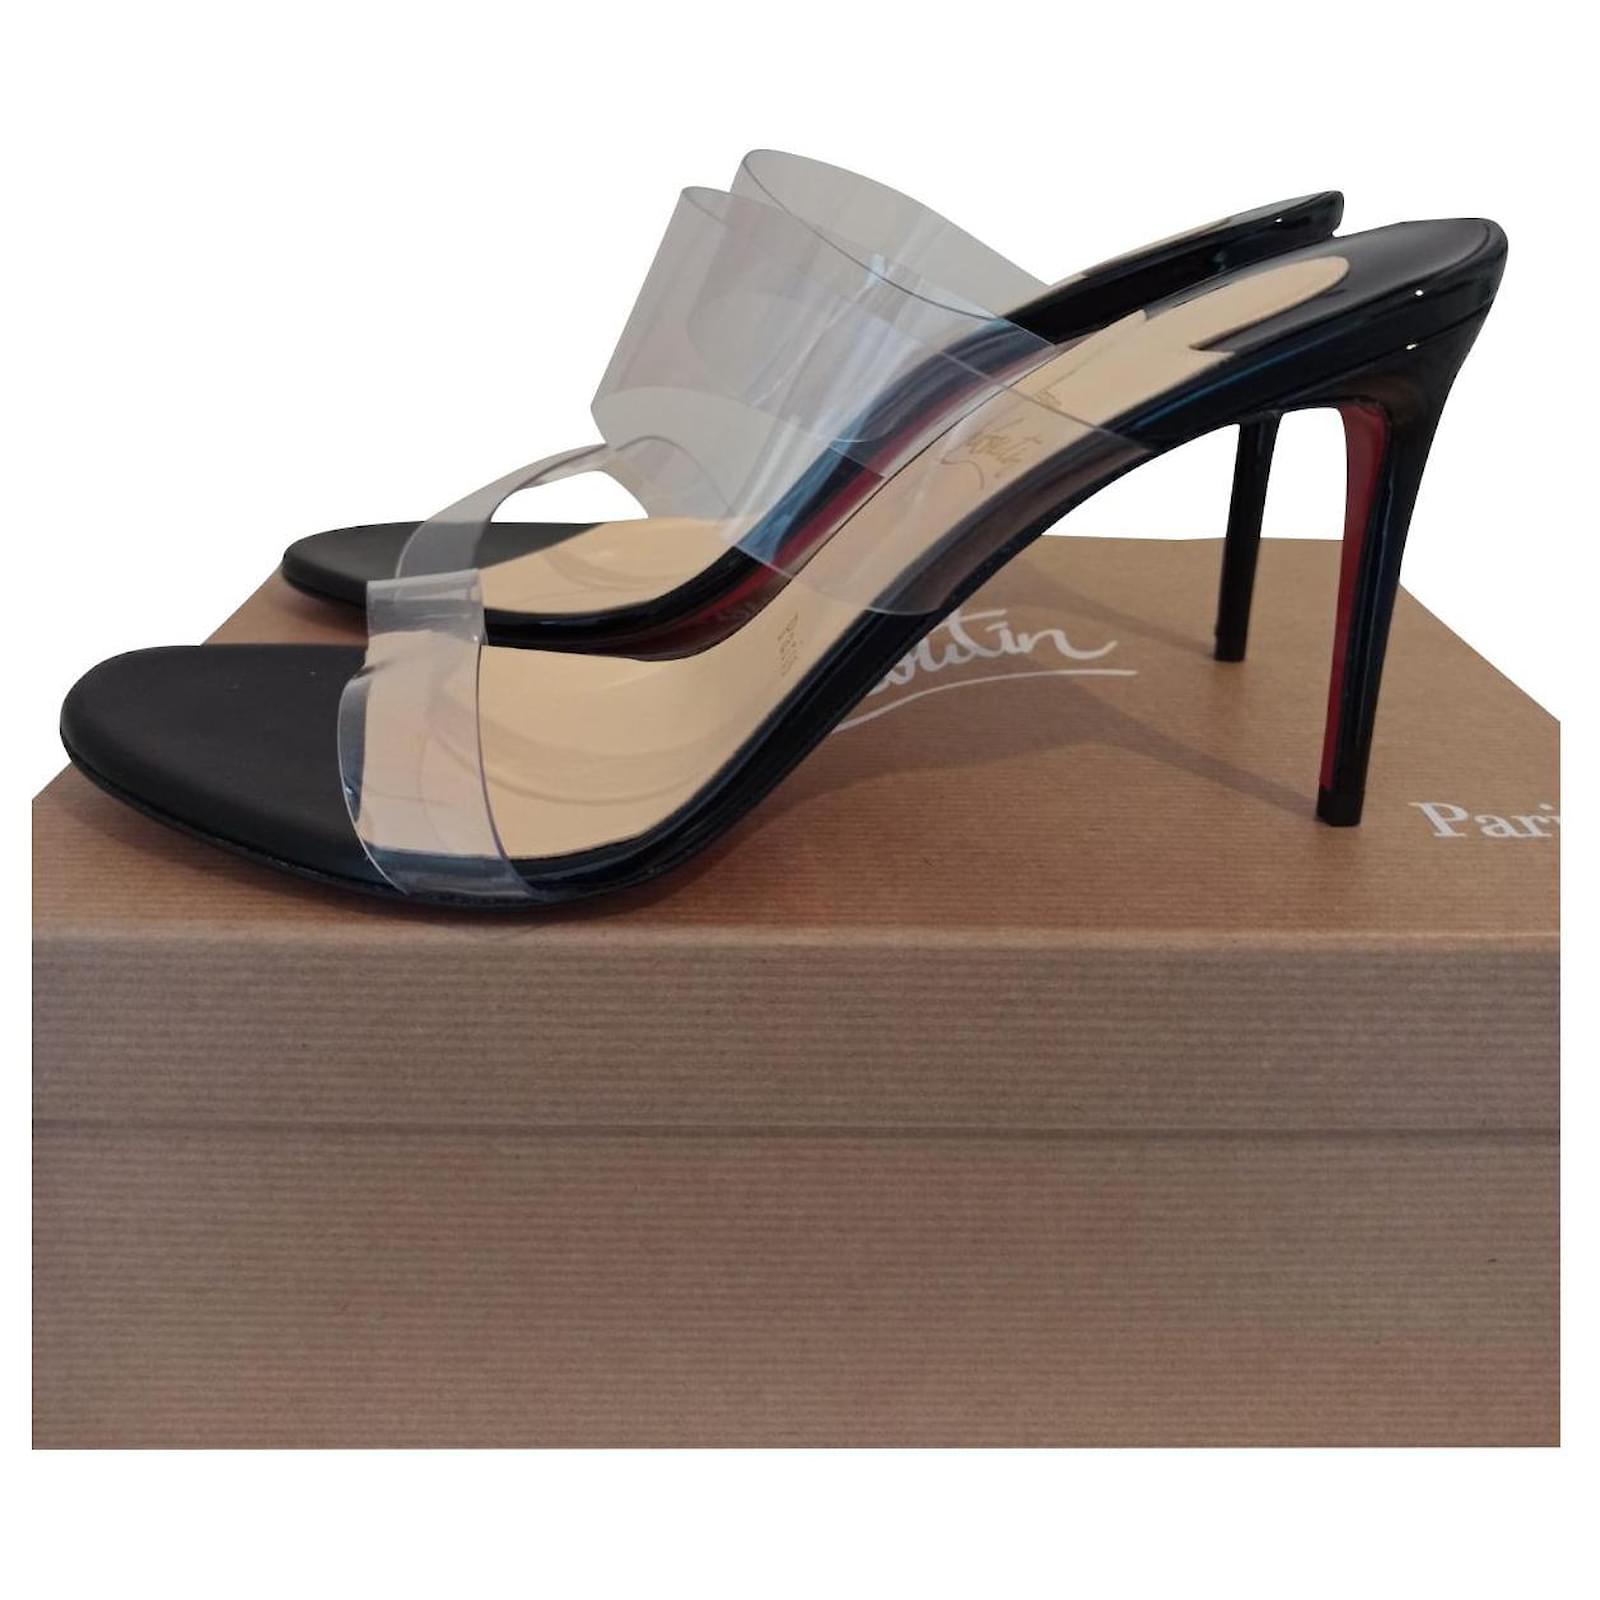 Christian Louboutin Coolraoul Black Sandals New